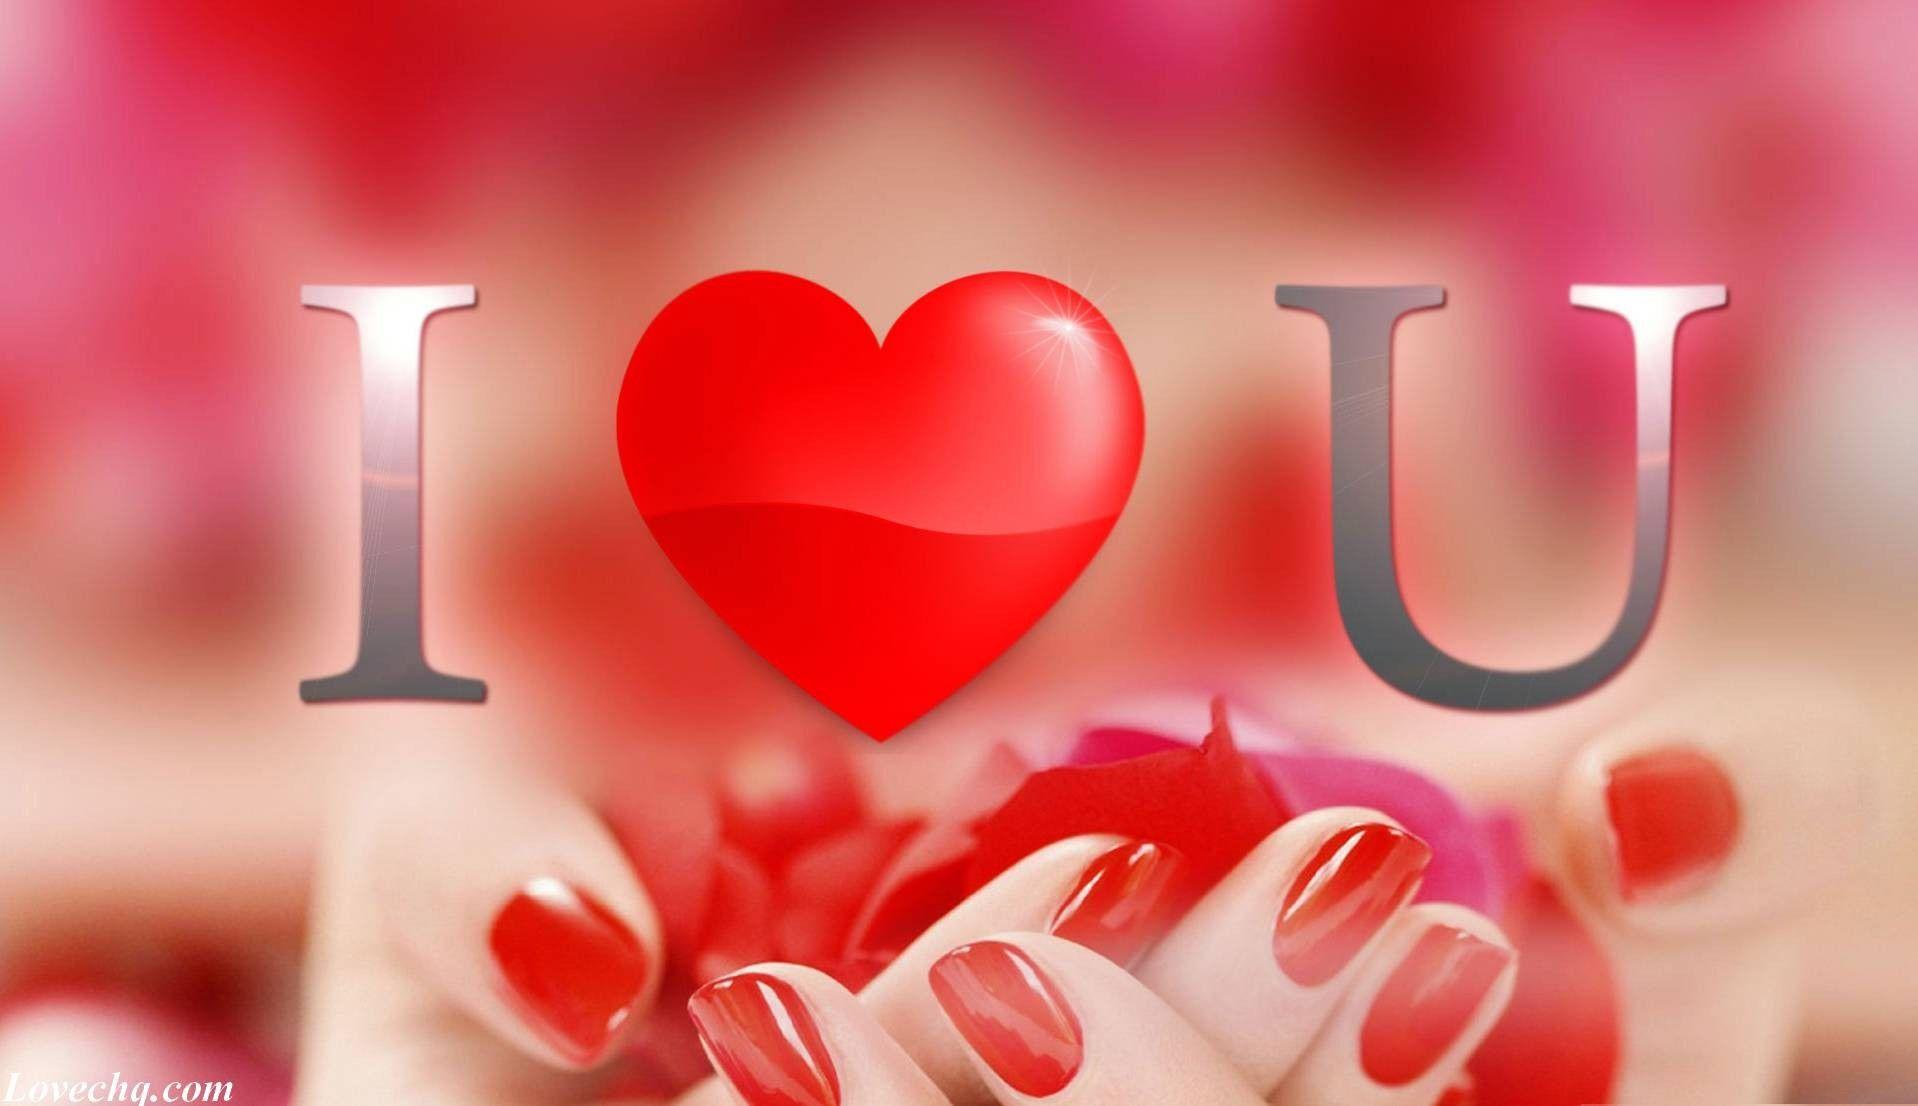 Cute Love Wallpaper for Facebook Cover Page